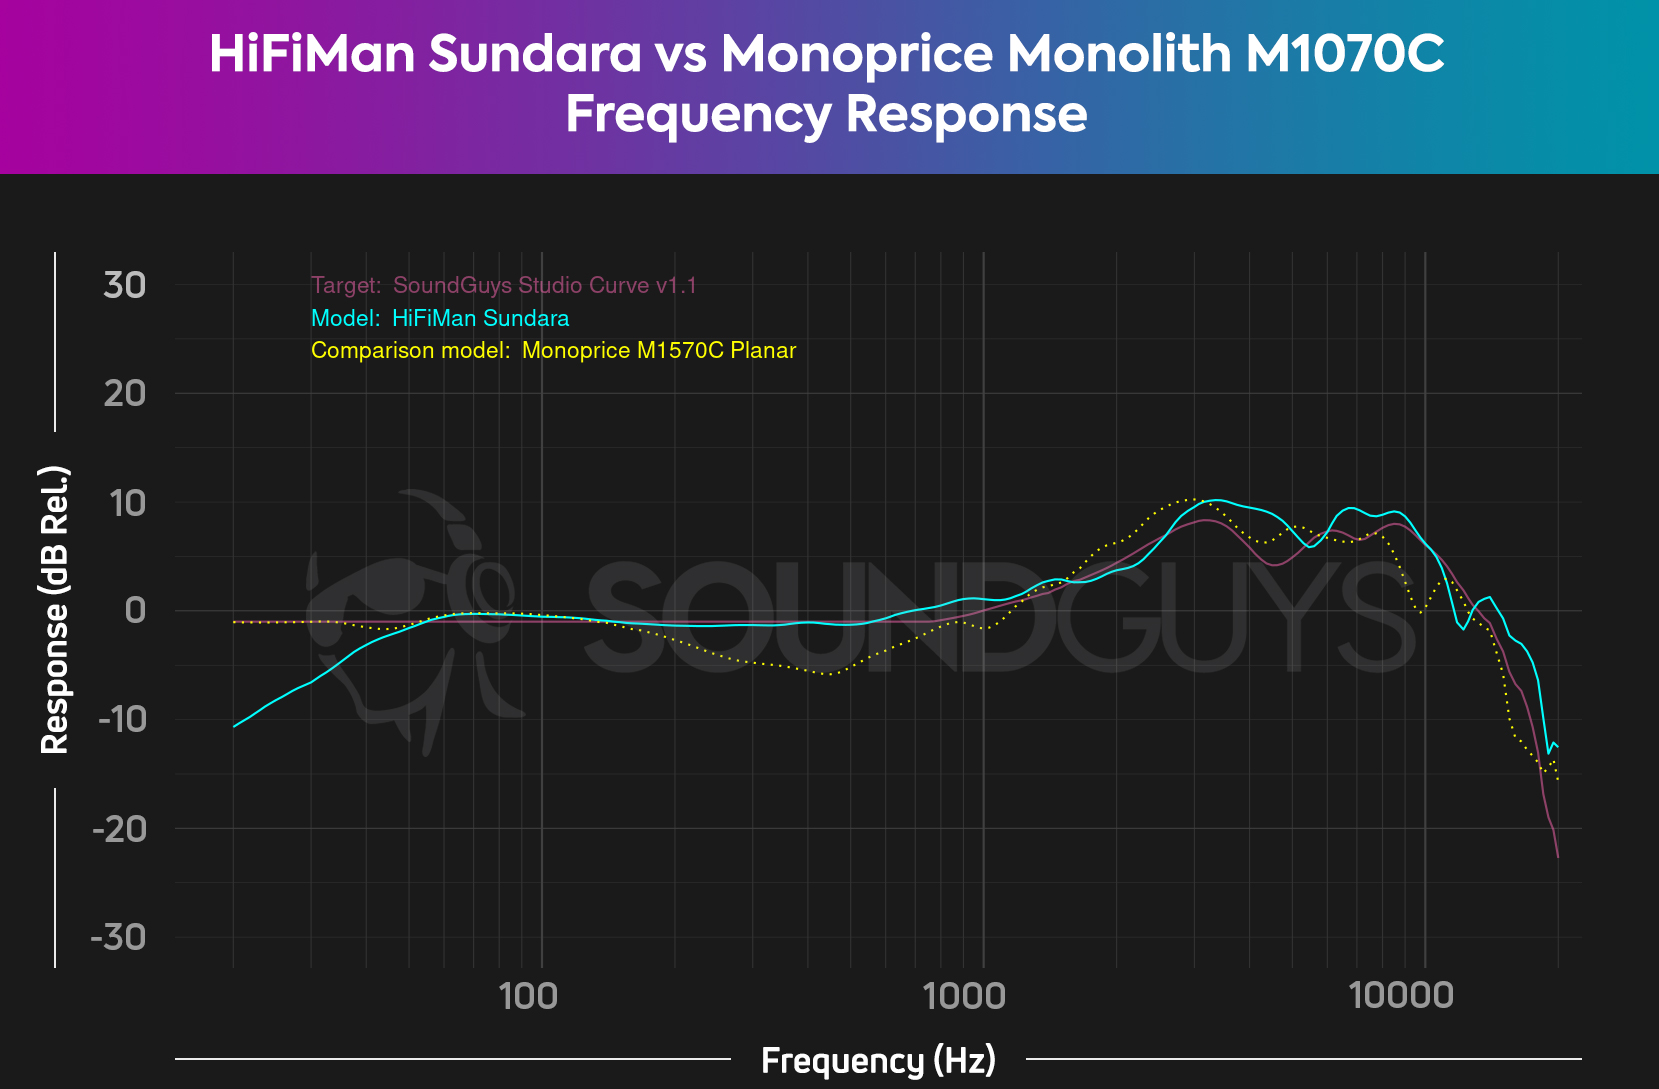 A chart compares the HiFiMan Sundara frequency response to the Monolith M1070C by Monoprice overlaid atop our studio curve, and the Monoprice headphones have a bit more sub-bass than the Sundara.